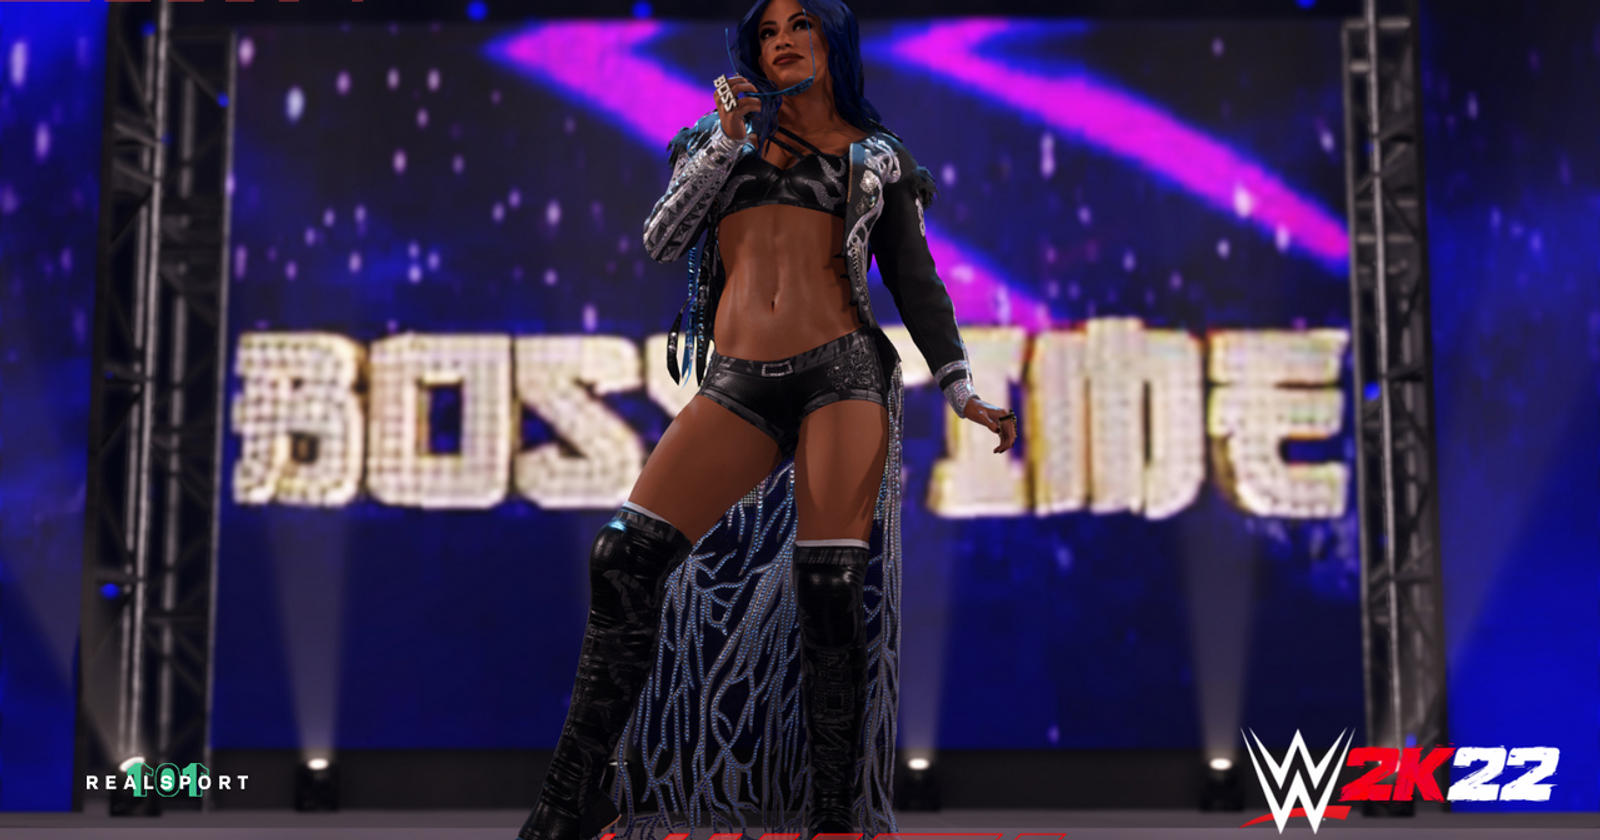 WWE 2K22 All Roster Ratings Revealed Officially (Newest Update